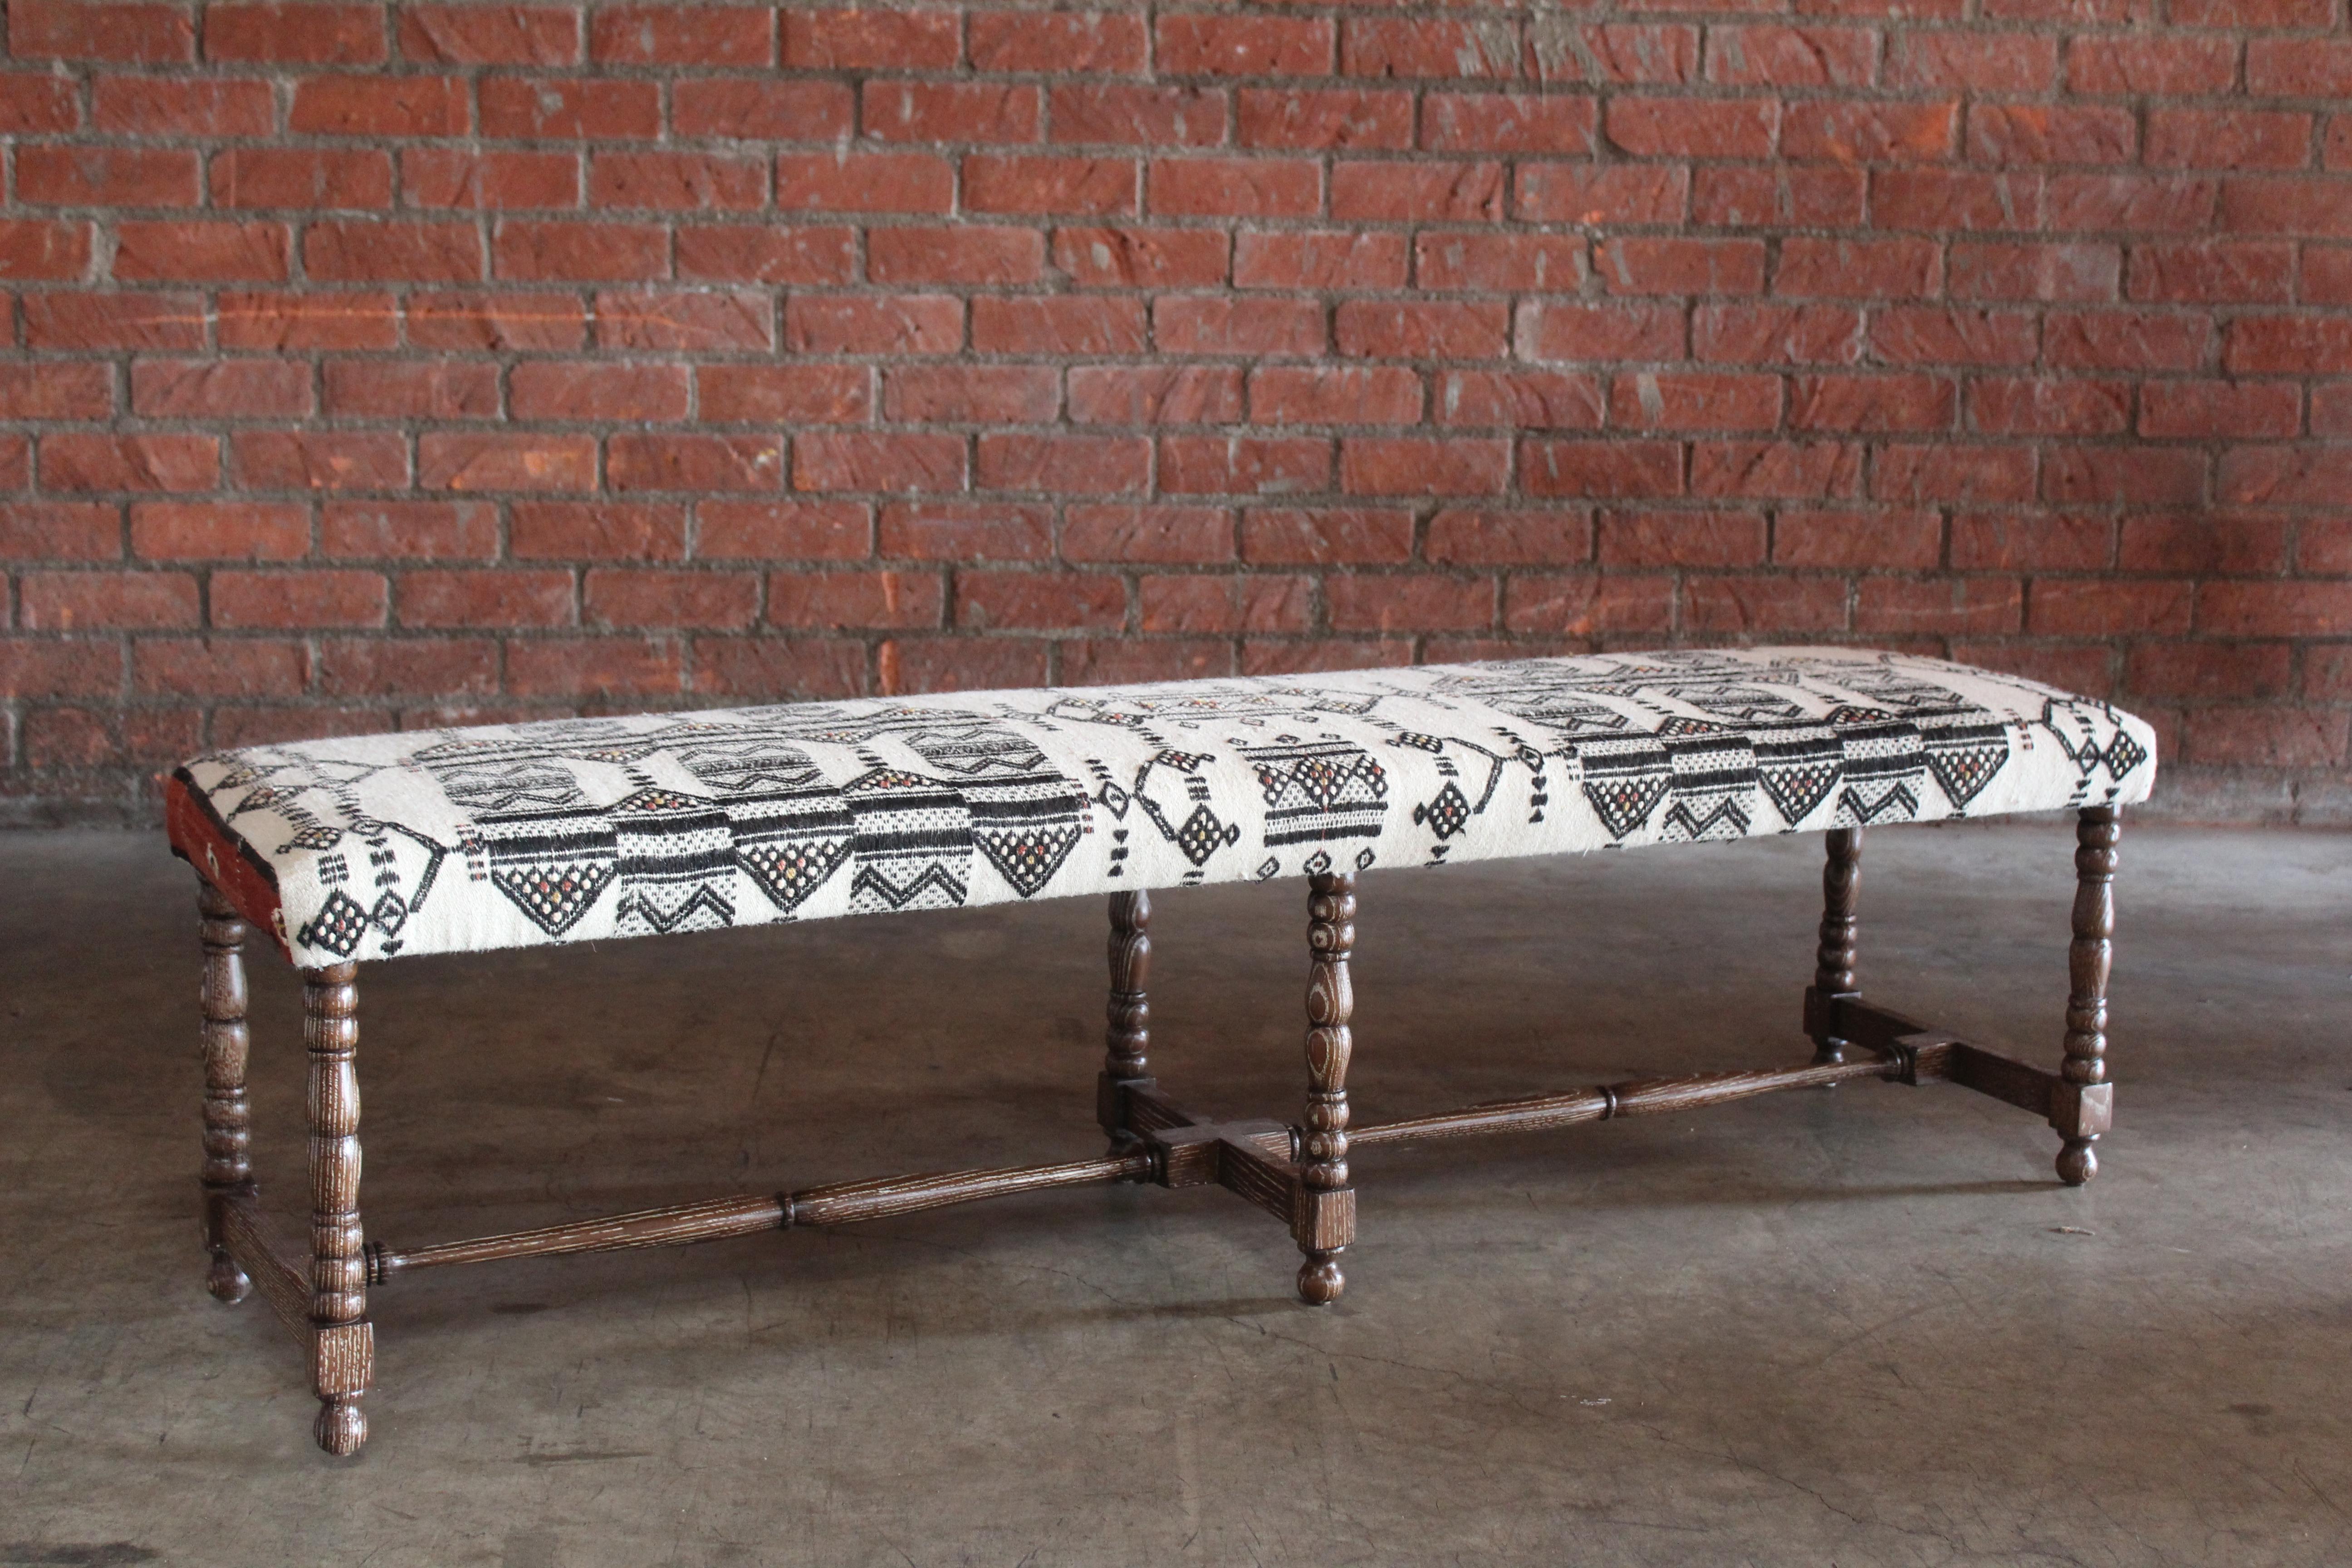 A custom bench made of solid oak- based on an antique bench. Dark cerused oak finish. Upholstered in a vintage wool Moroccan textile.